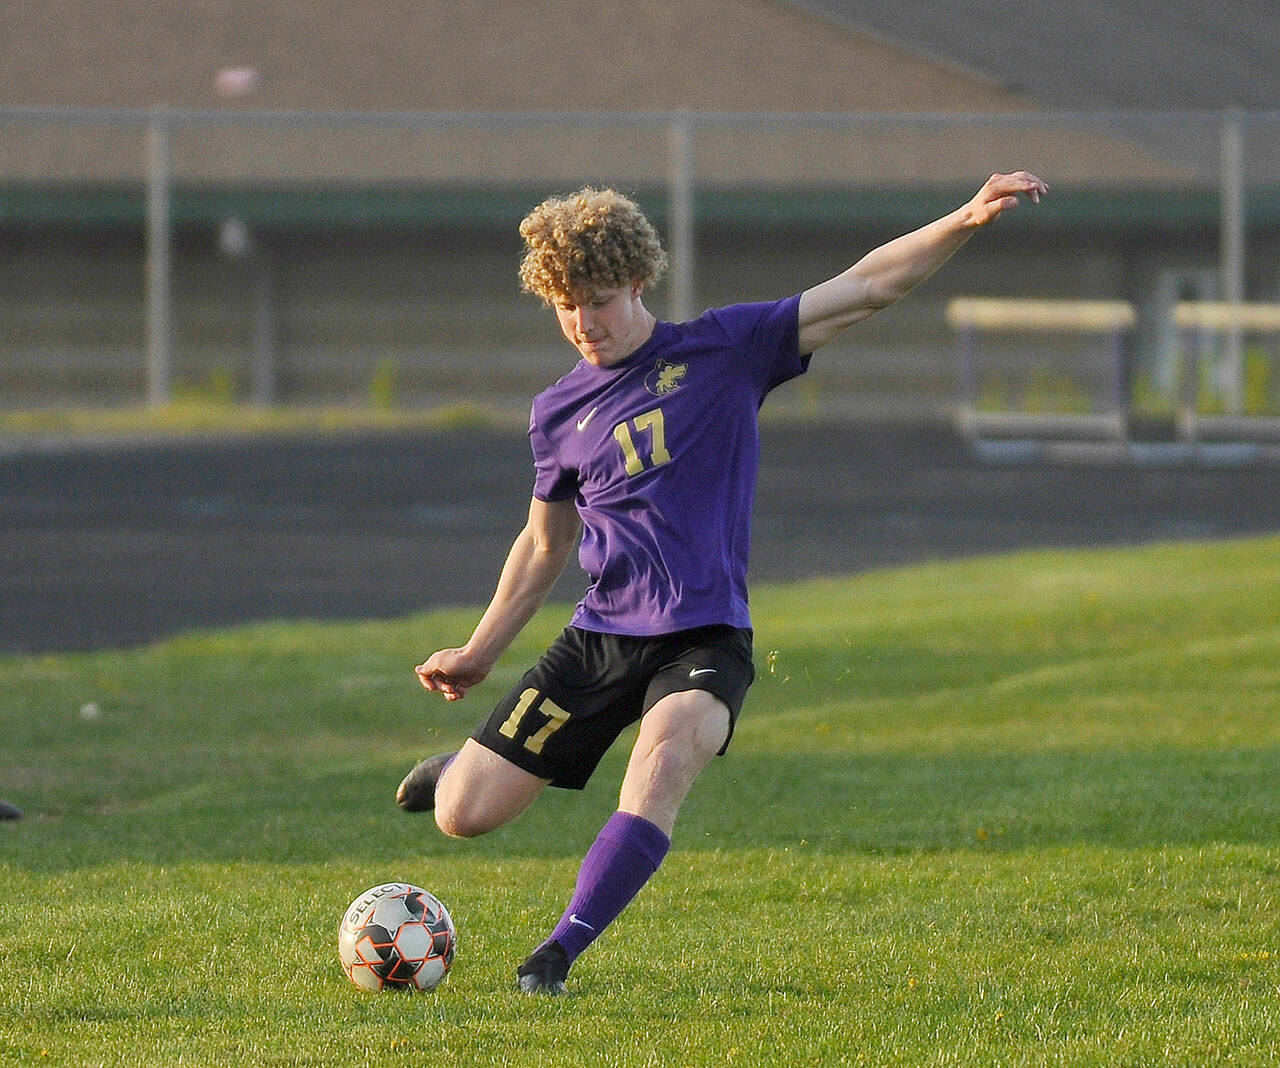 Sequim Gazette file photo by Michael Dashiell
Aidan Henninger, pictured here taking a free kick in Sequim High School’s 6-1 win over Olympic on April 19, 2021, has signed a letter of intent to play for NCAA Division III Franciscan University of Steubenville, Ohio.